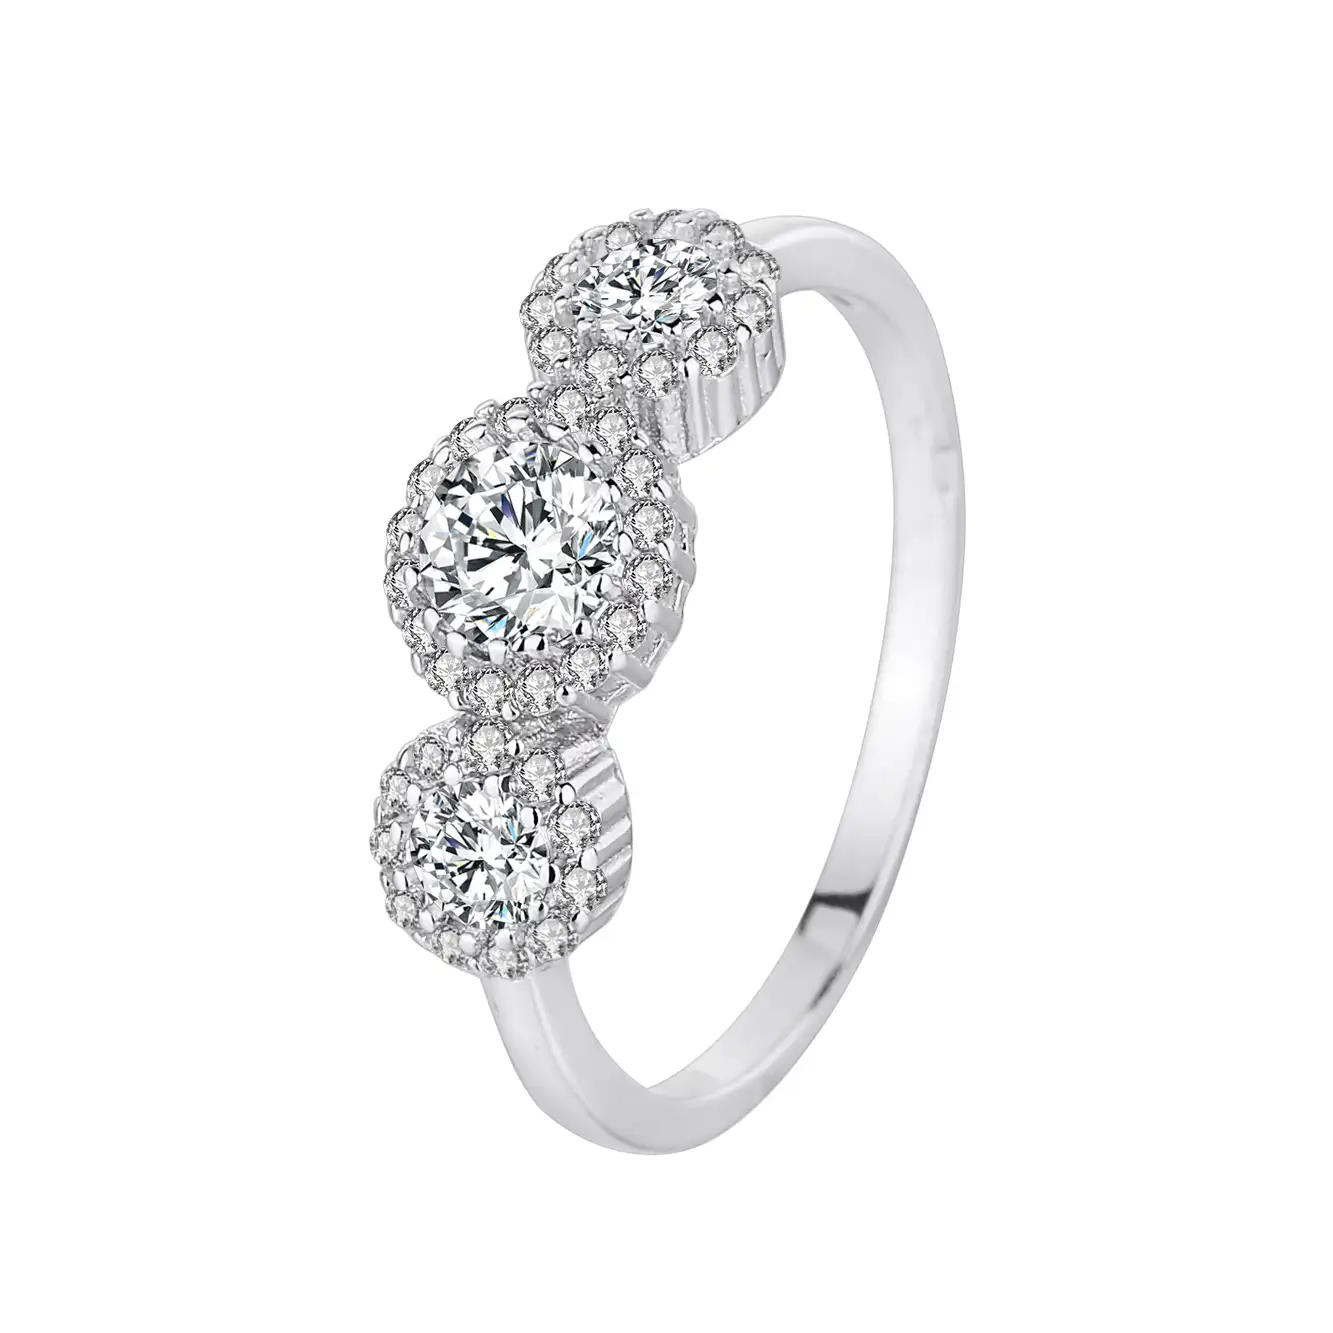 Silver Cubic Zirconia Solitaire Ring 70200033